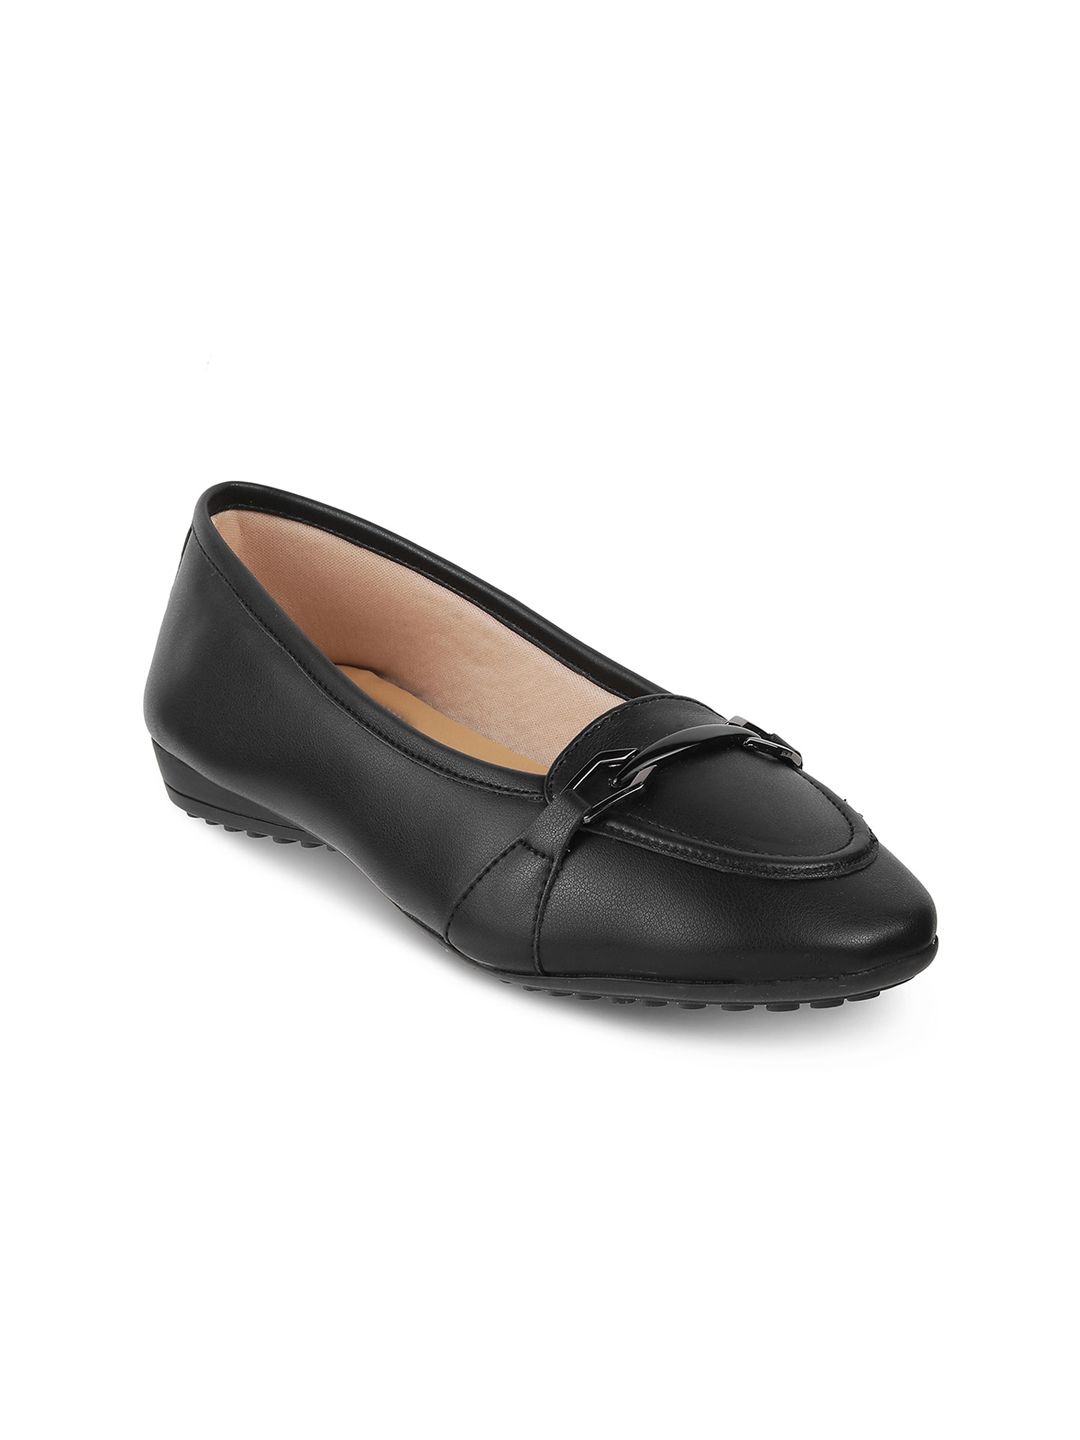 PEPPER Women Buckle Detail Loafers Price in India